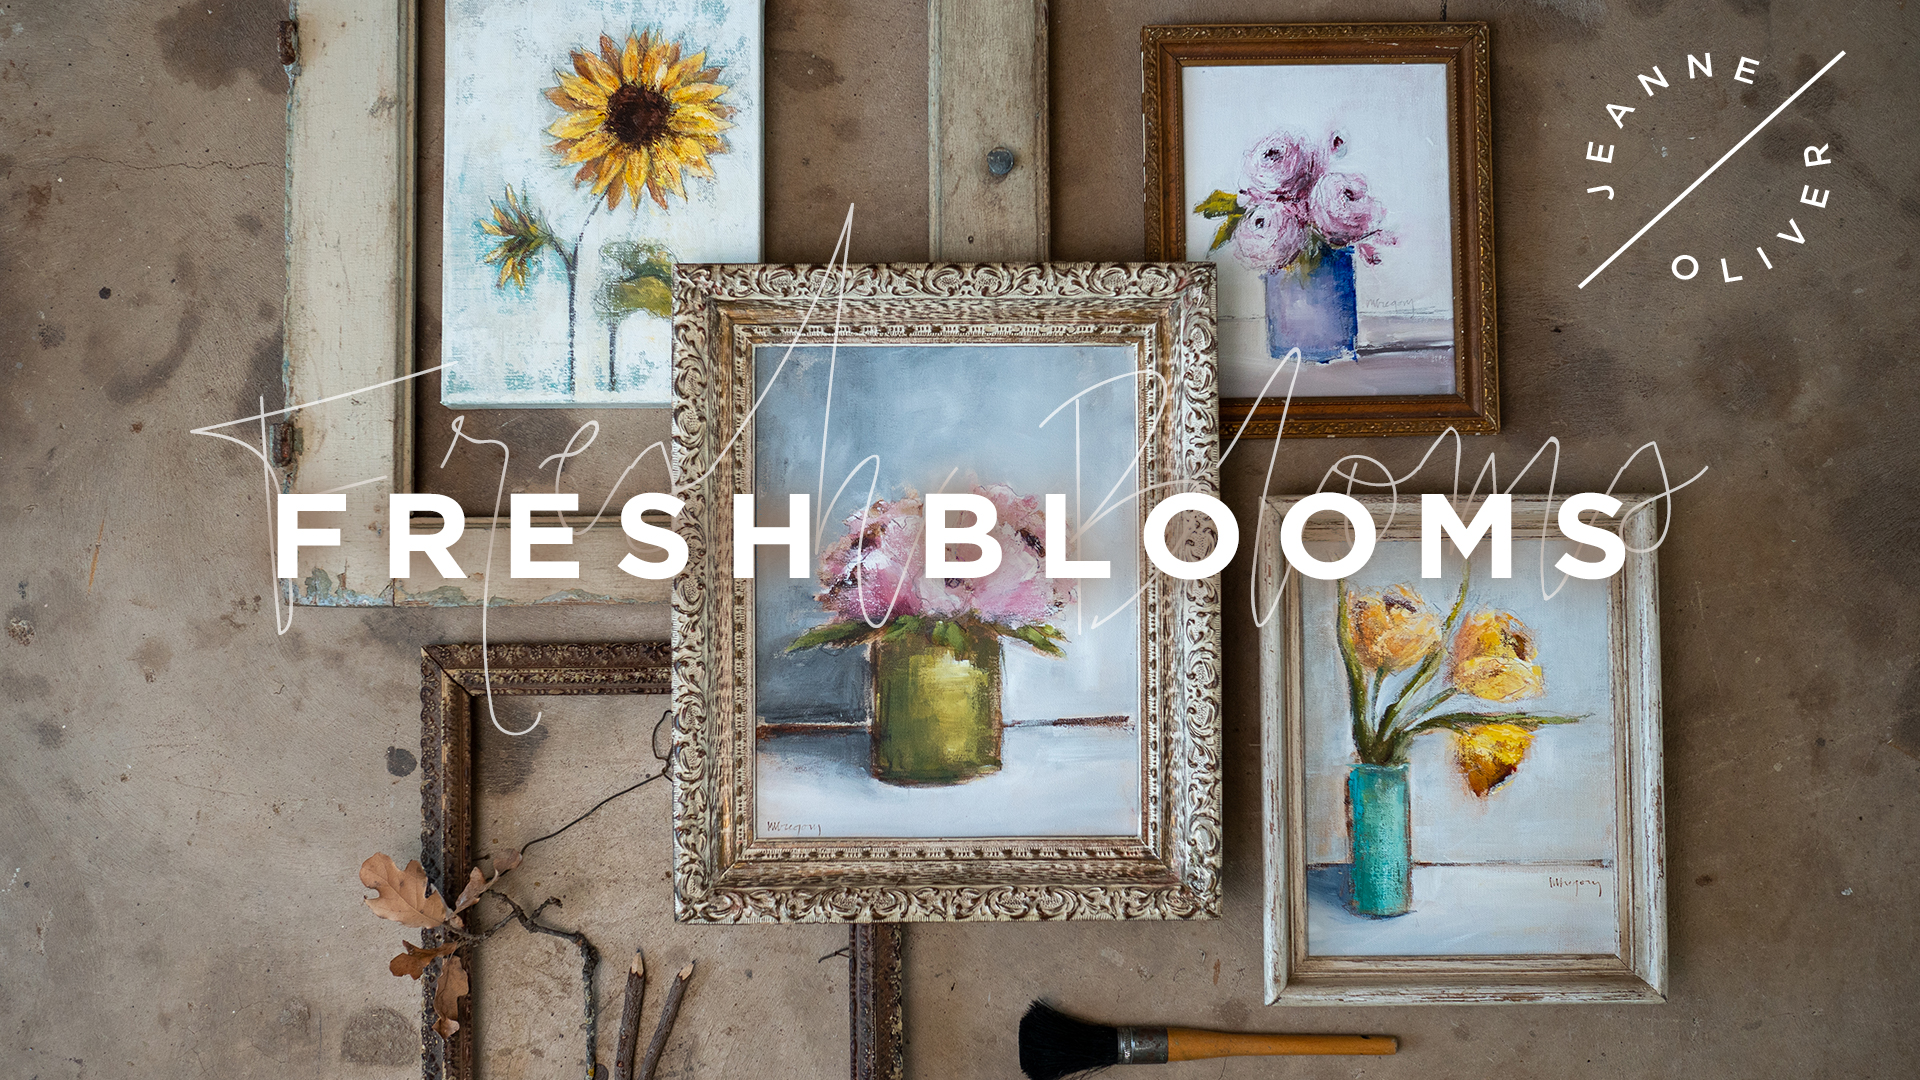 Both Courses Begin Tomorrow | Fresh Blooms and Made With Love